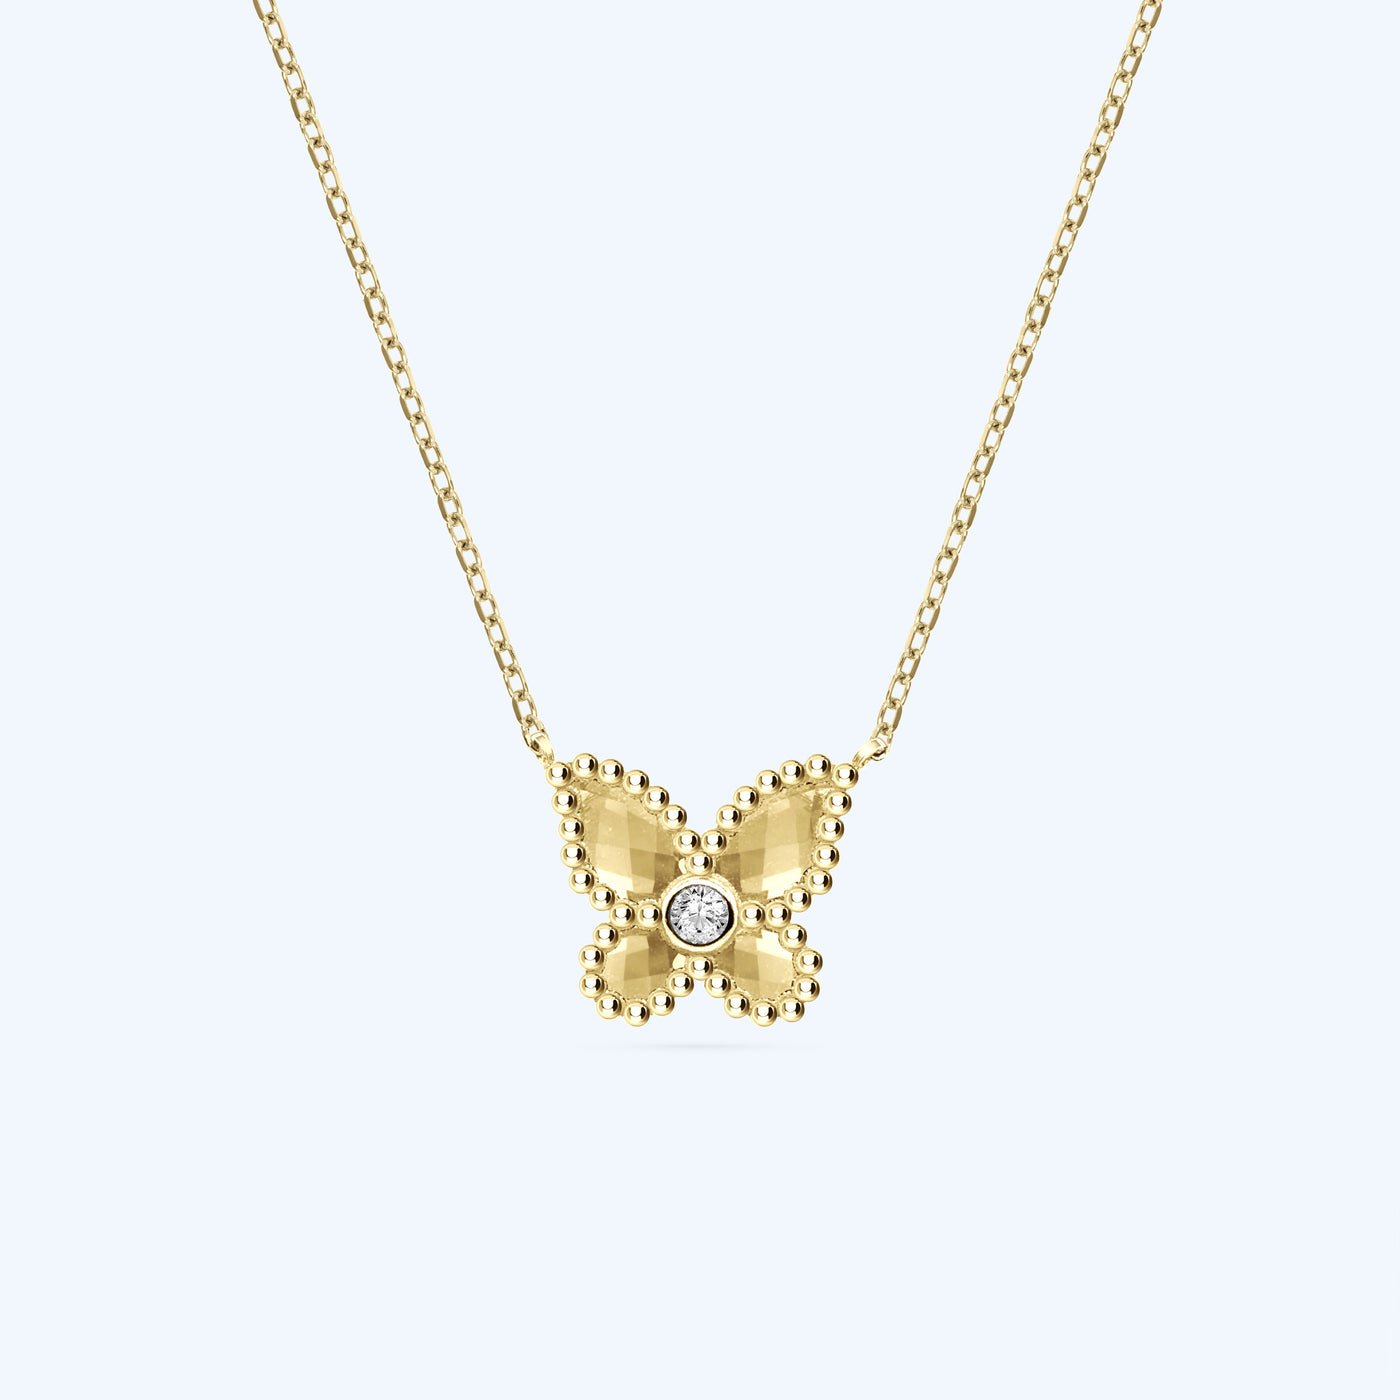 Serena Butterfly Necklace